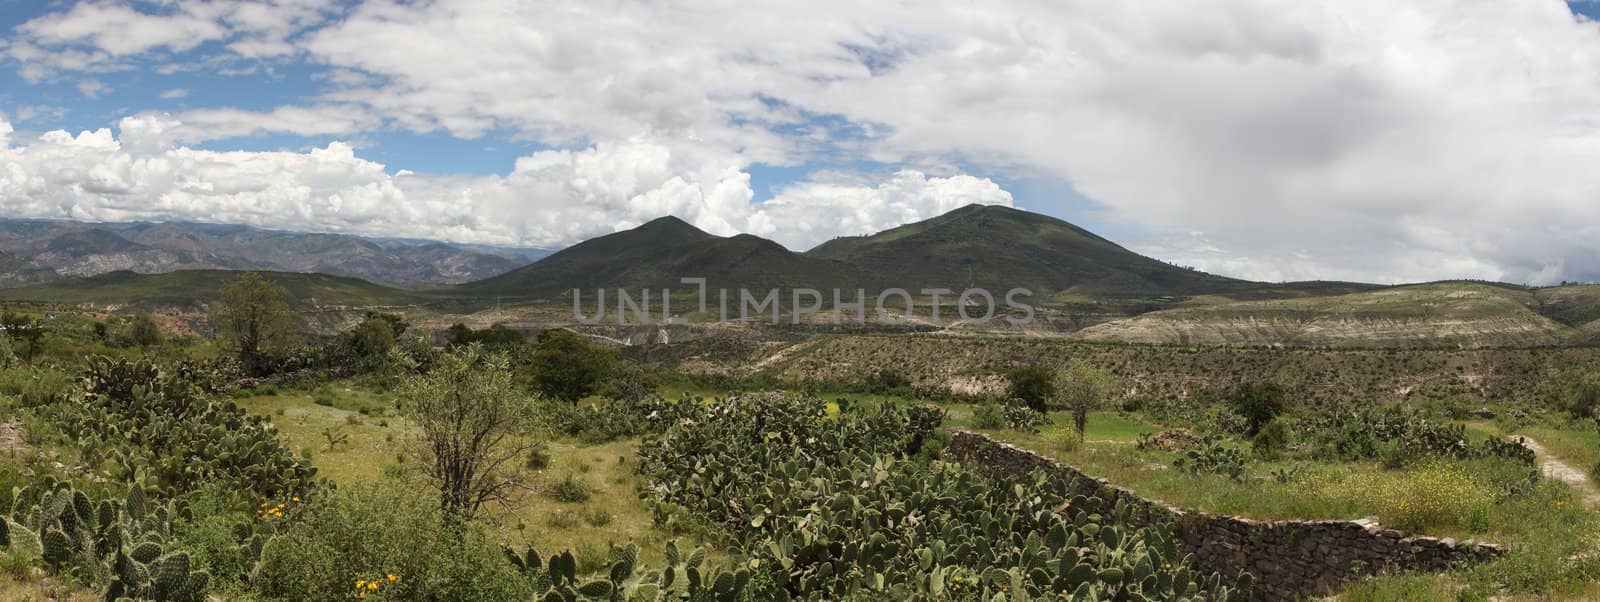 Panorama of countryside landscape in Peru
 by gigidread